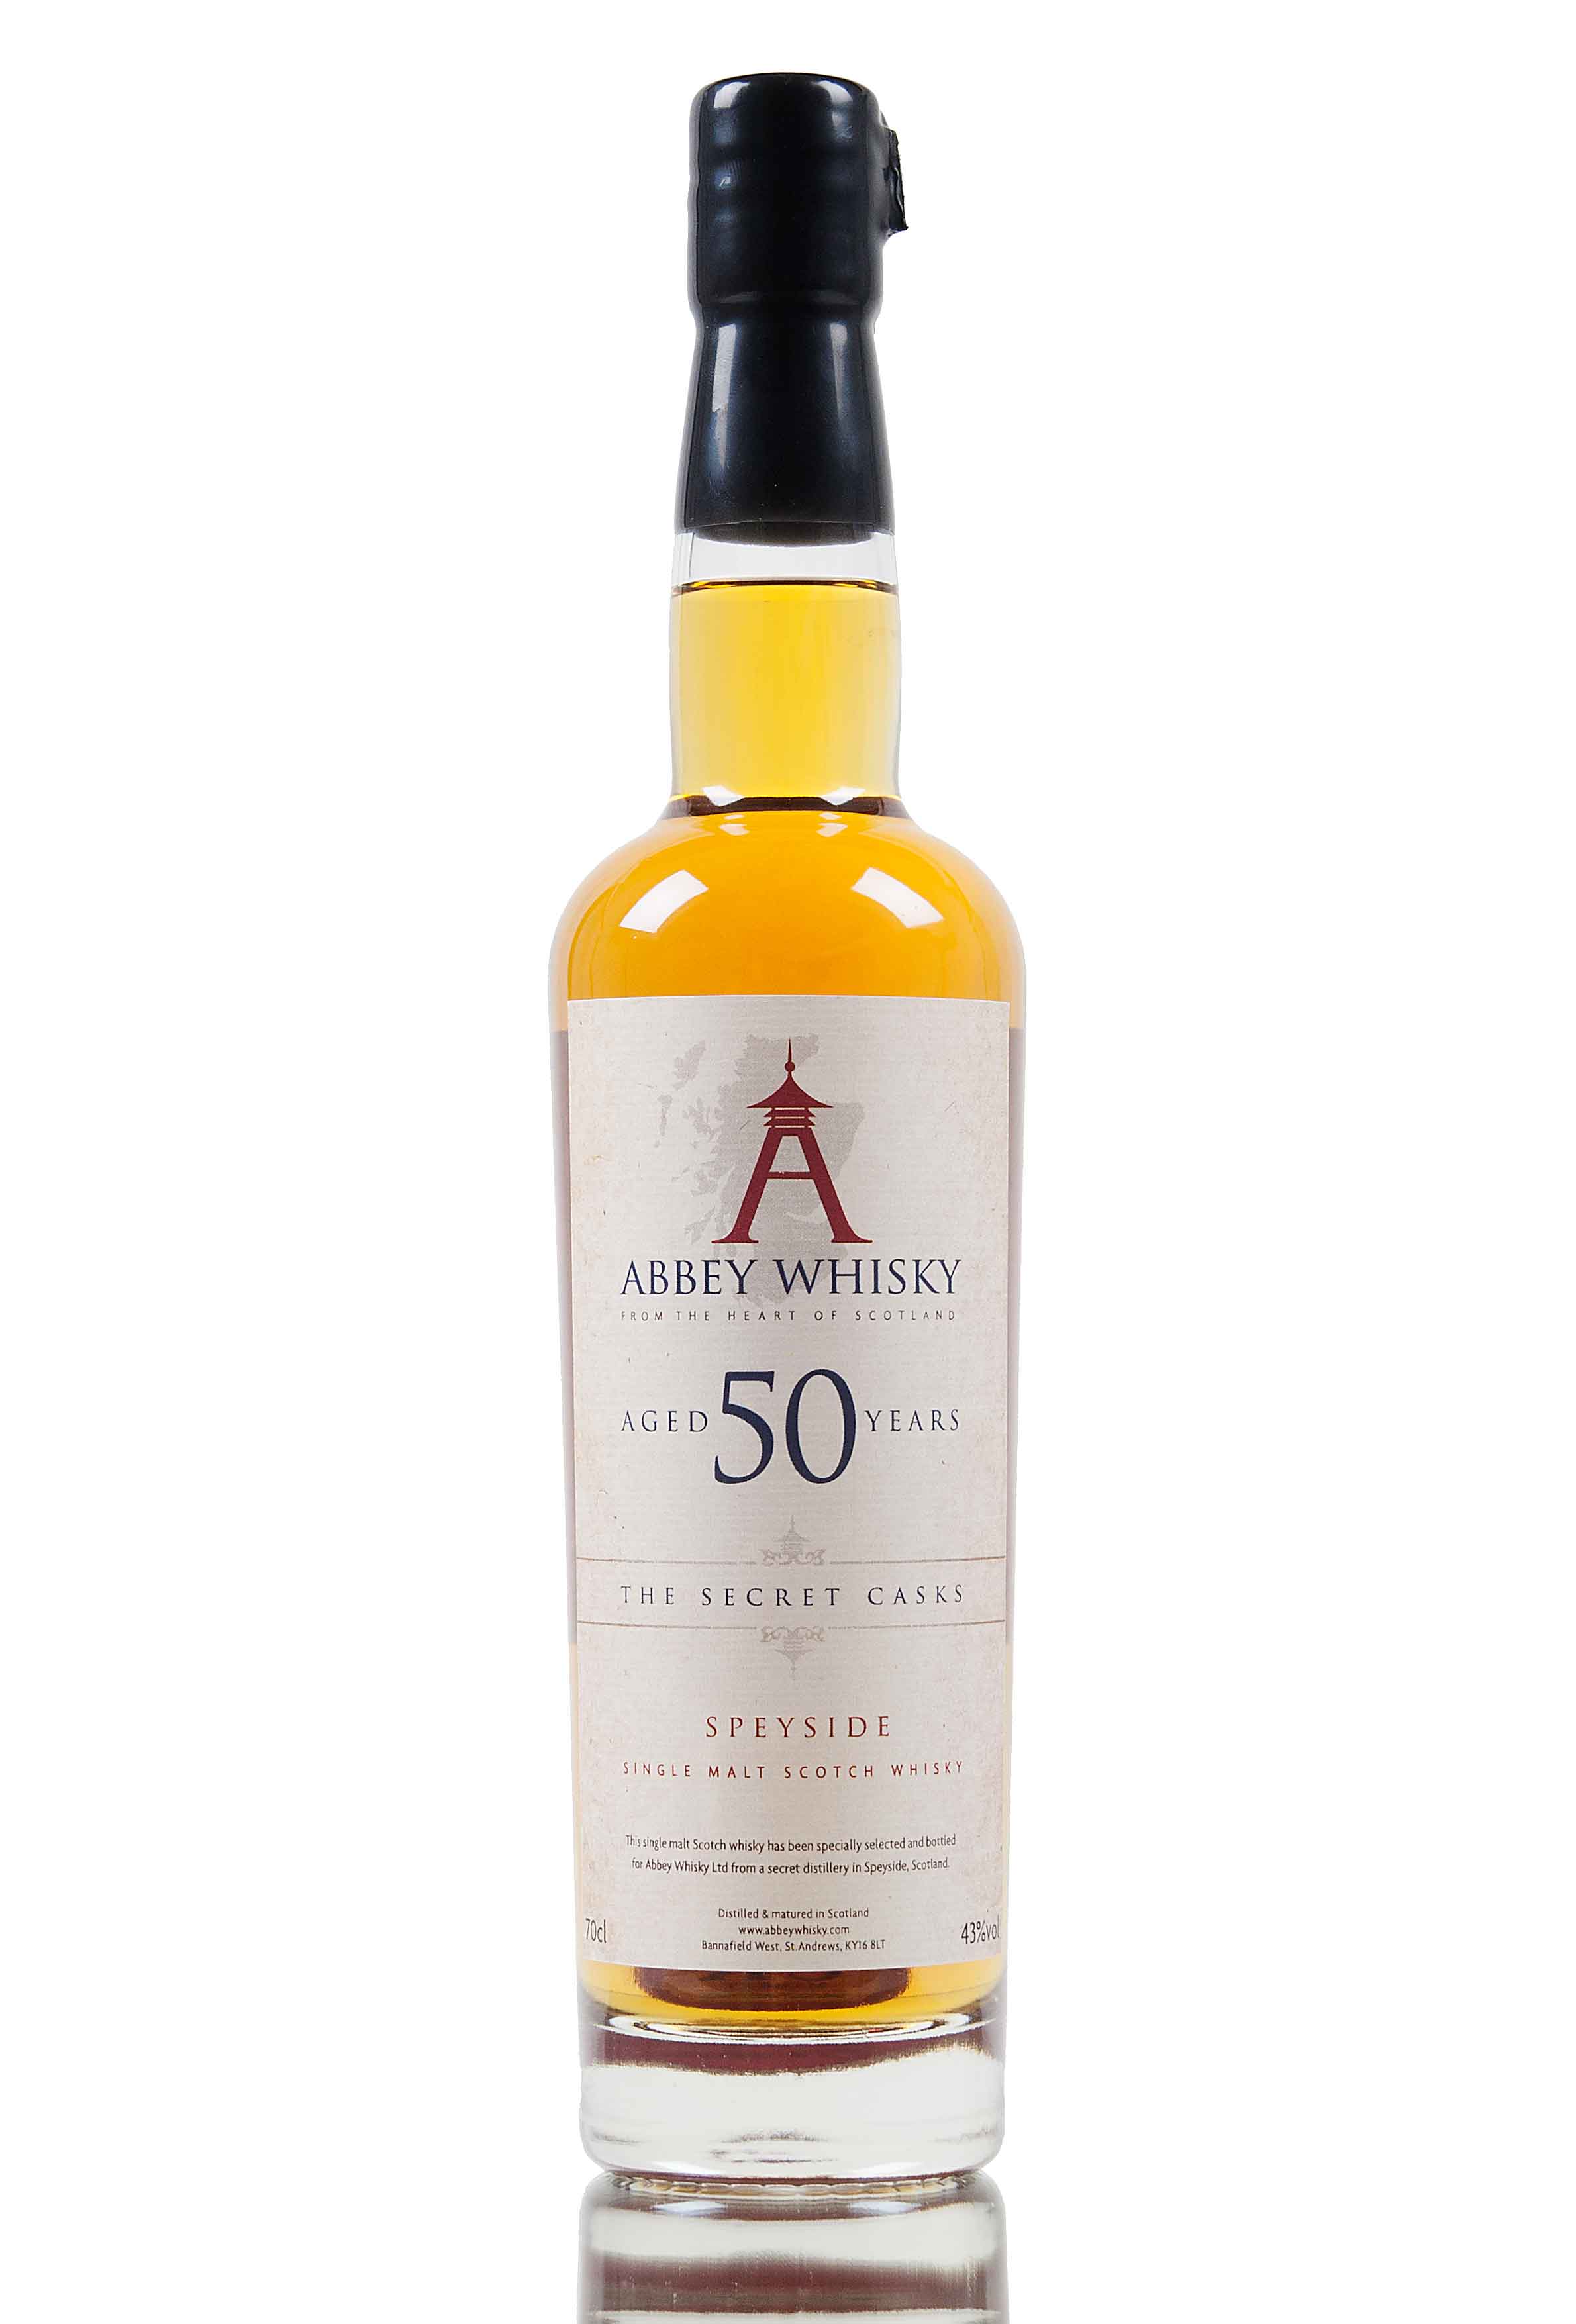 Abbey Whisky 50 Year Old Speyside | The Secret Casks